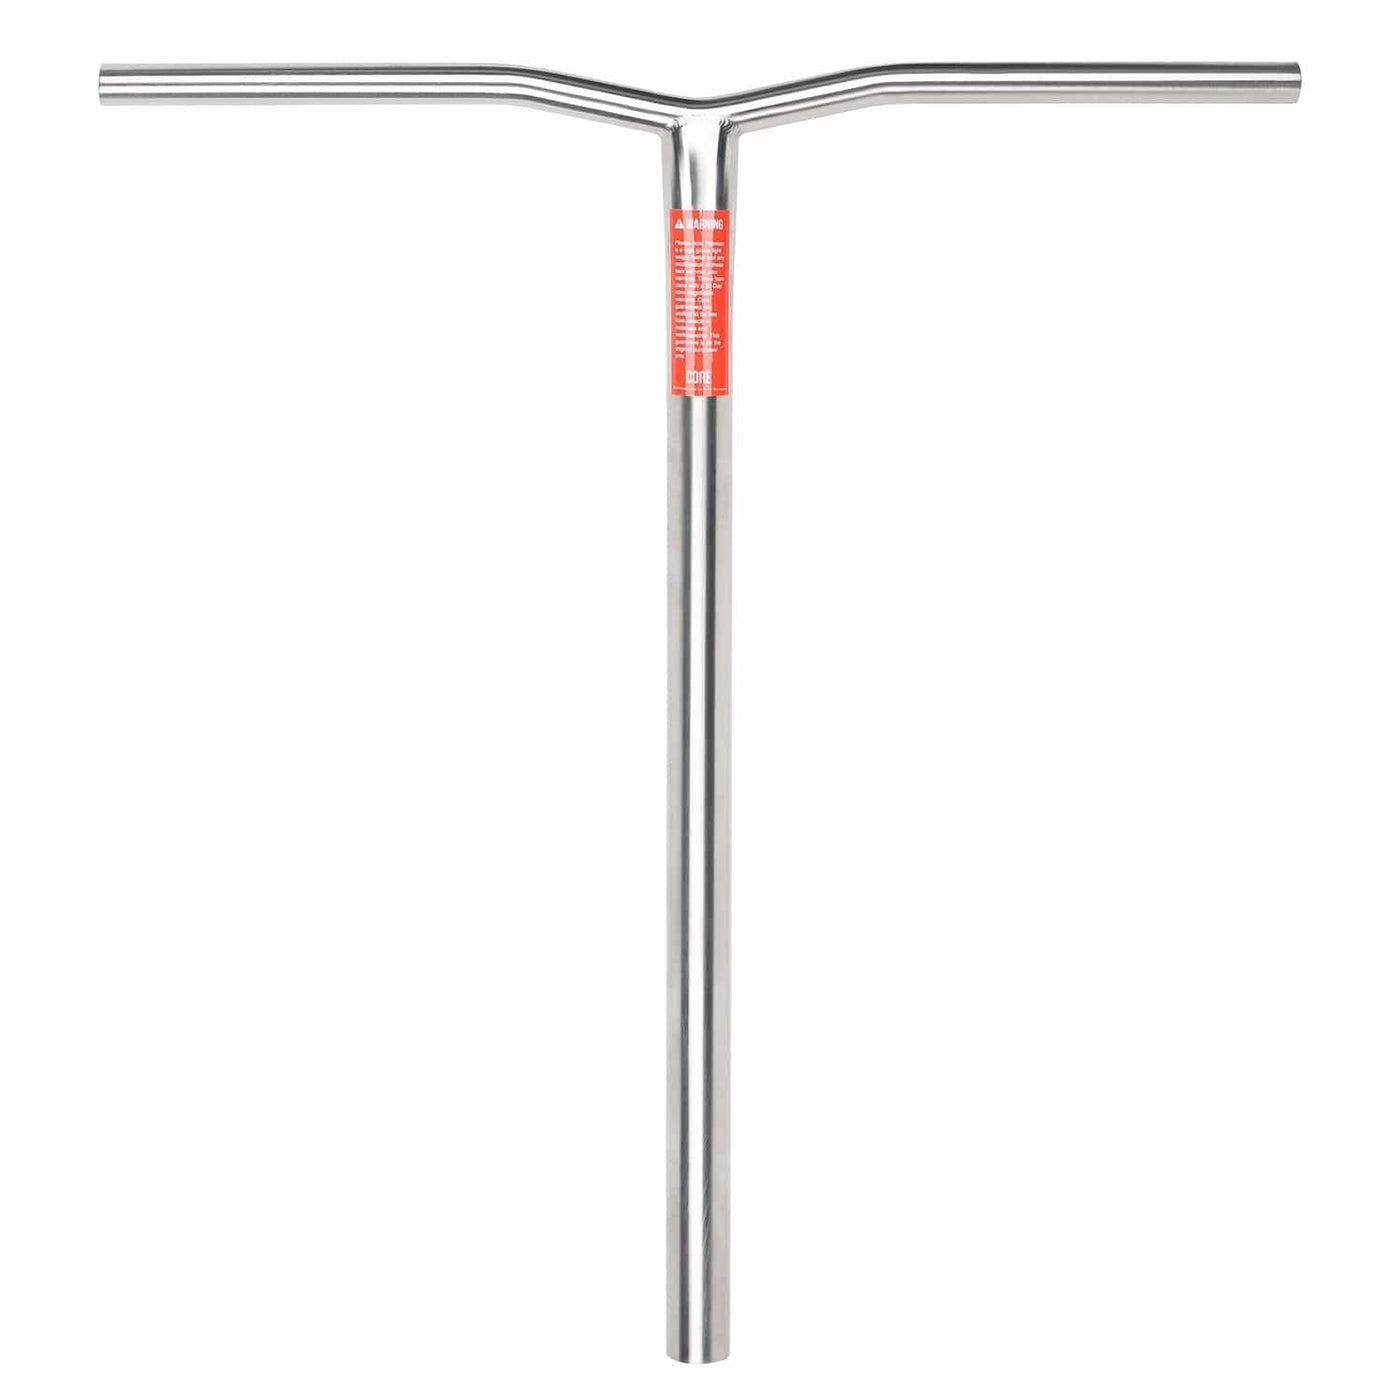 CORE Appolo Titanium Stunt Scooter Bar 580mm SCS/HIC Raw I Scooter Bar Back